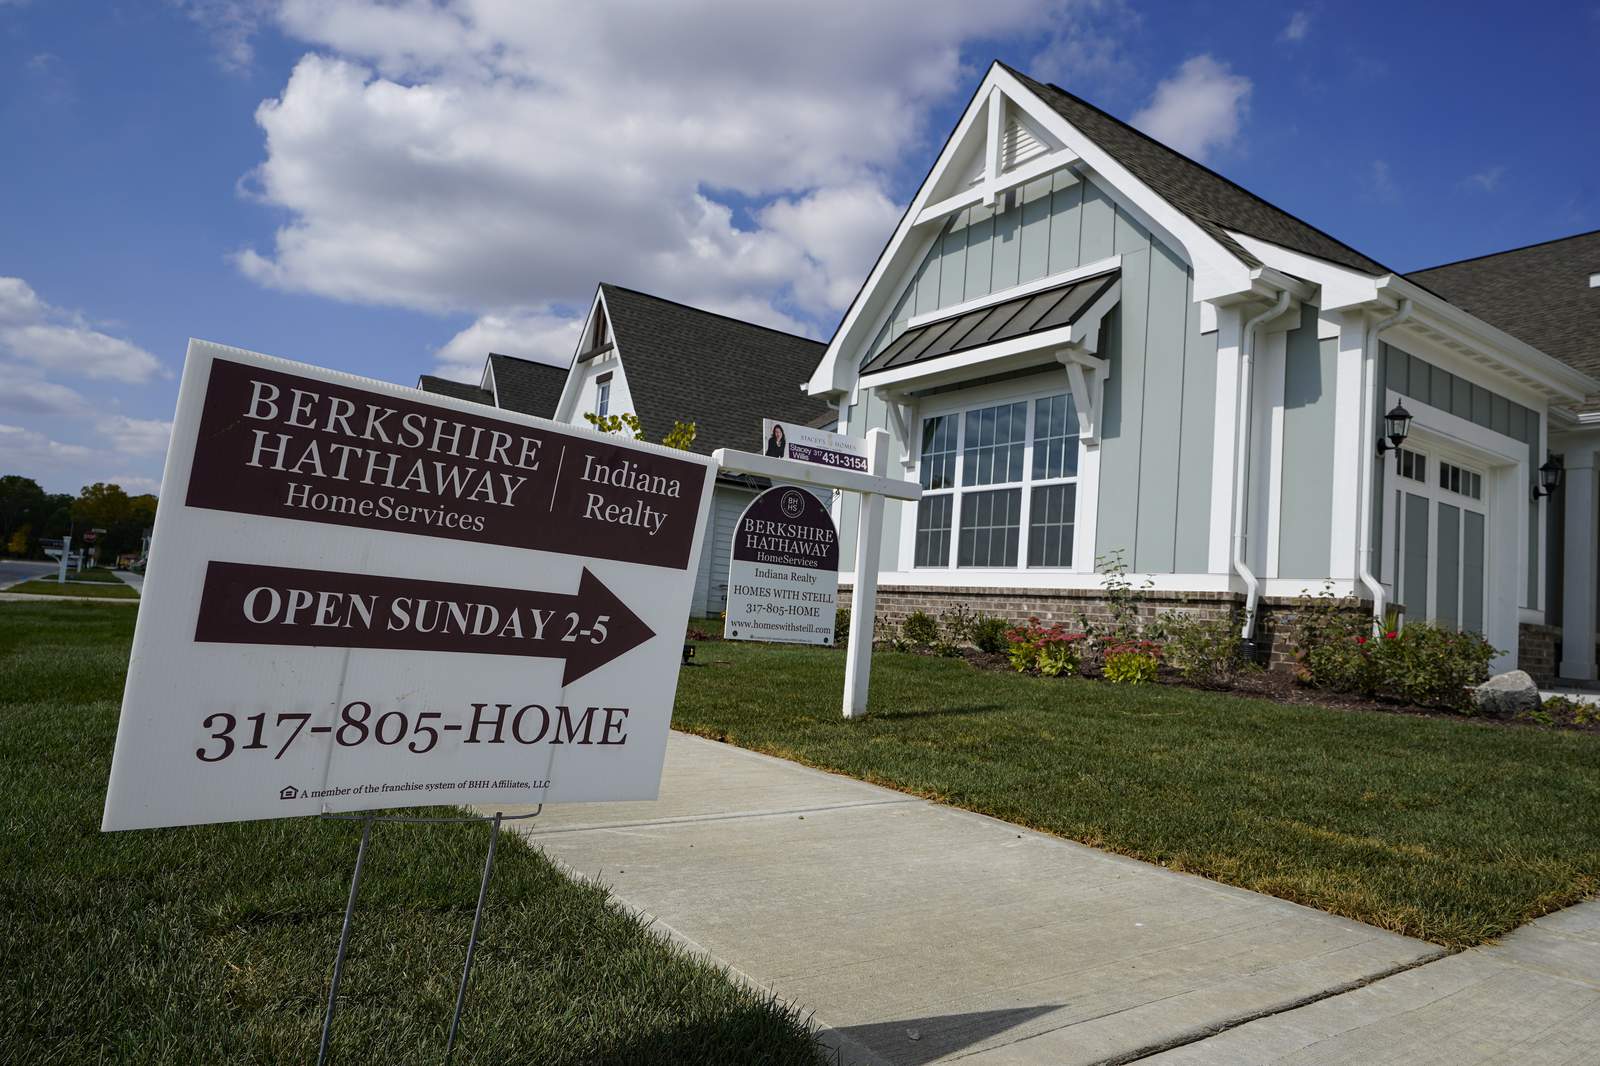 Existing home sales up 4.3% in October, fifth monthly gain